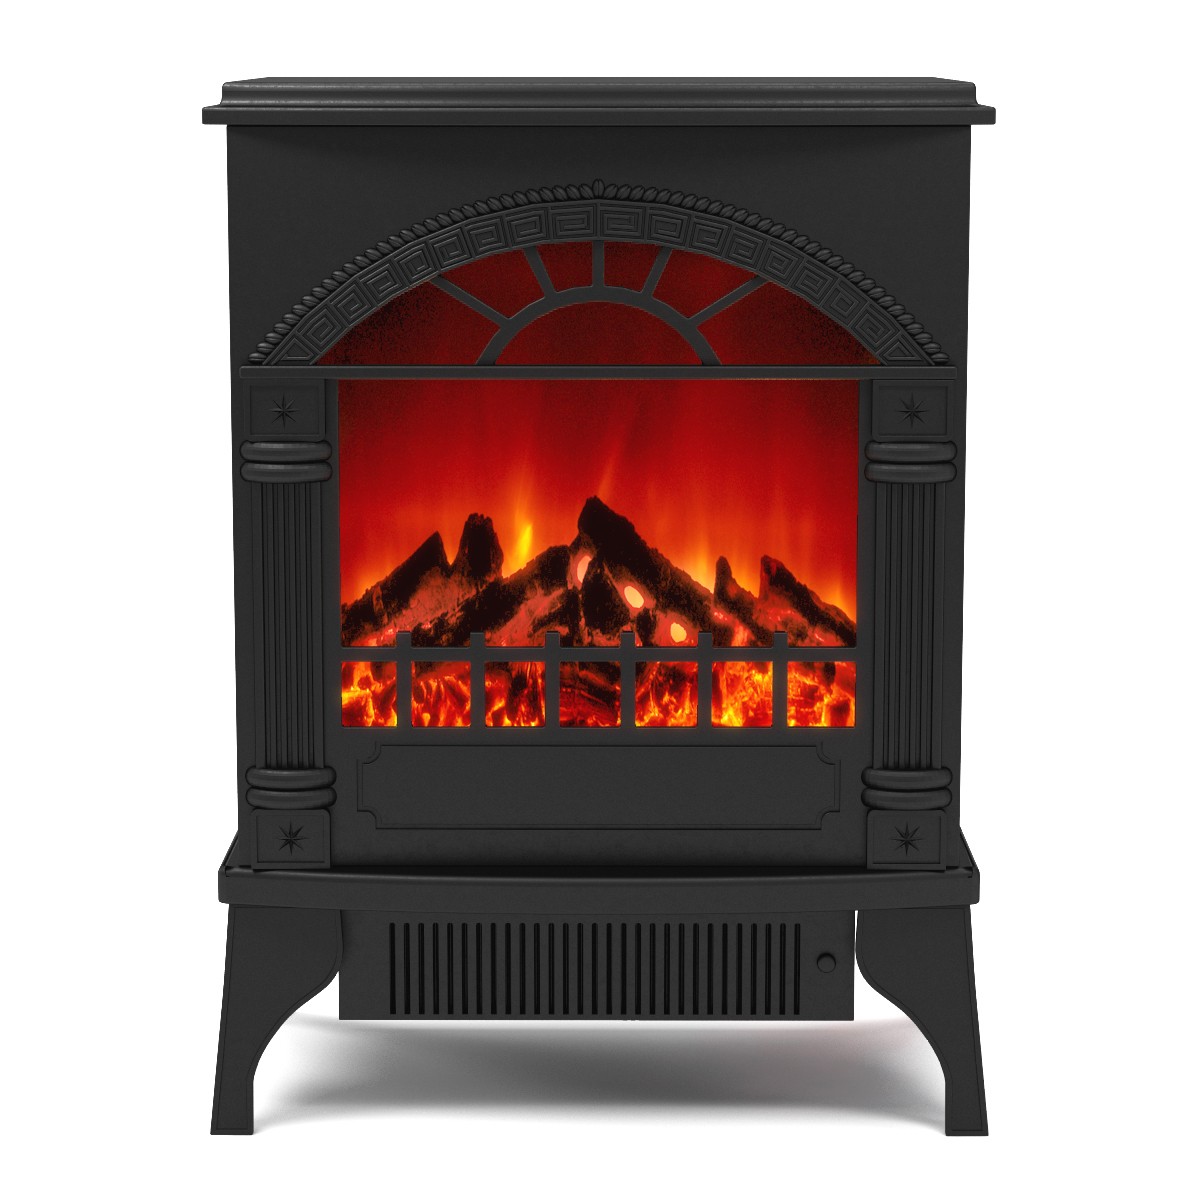 Regal Flame Juno Electric Fireplace Free Standing Portable Space Heater Stove Better than Wood Fireplaces, Gas Logs, Wall Mounte